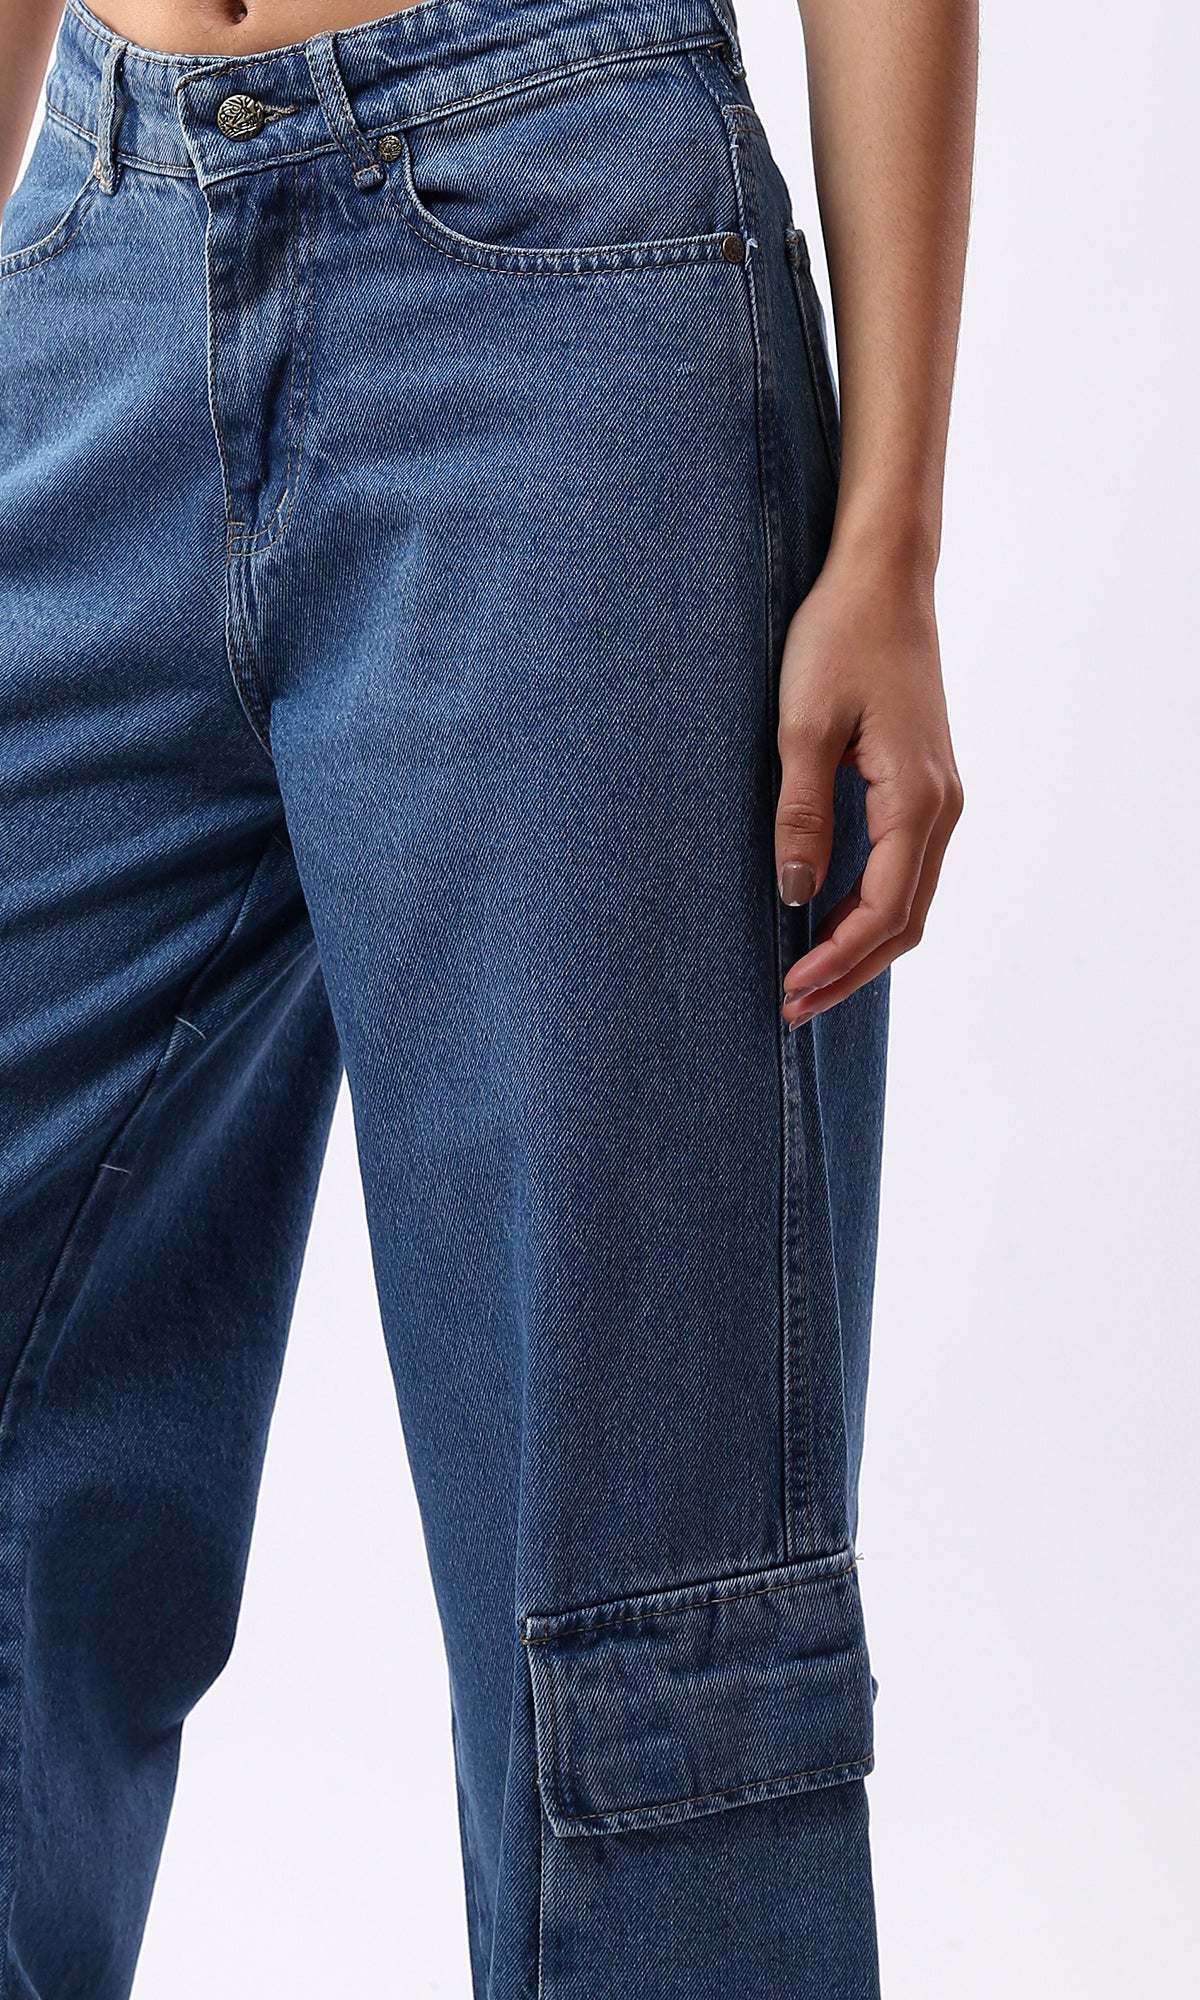 O177960 Standard Blue Wide Leg Jeans With Multi-Pockets